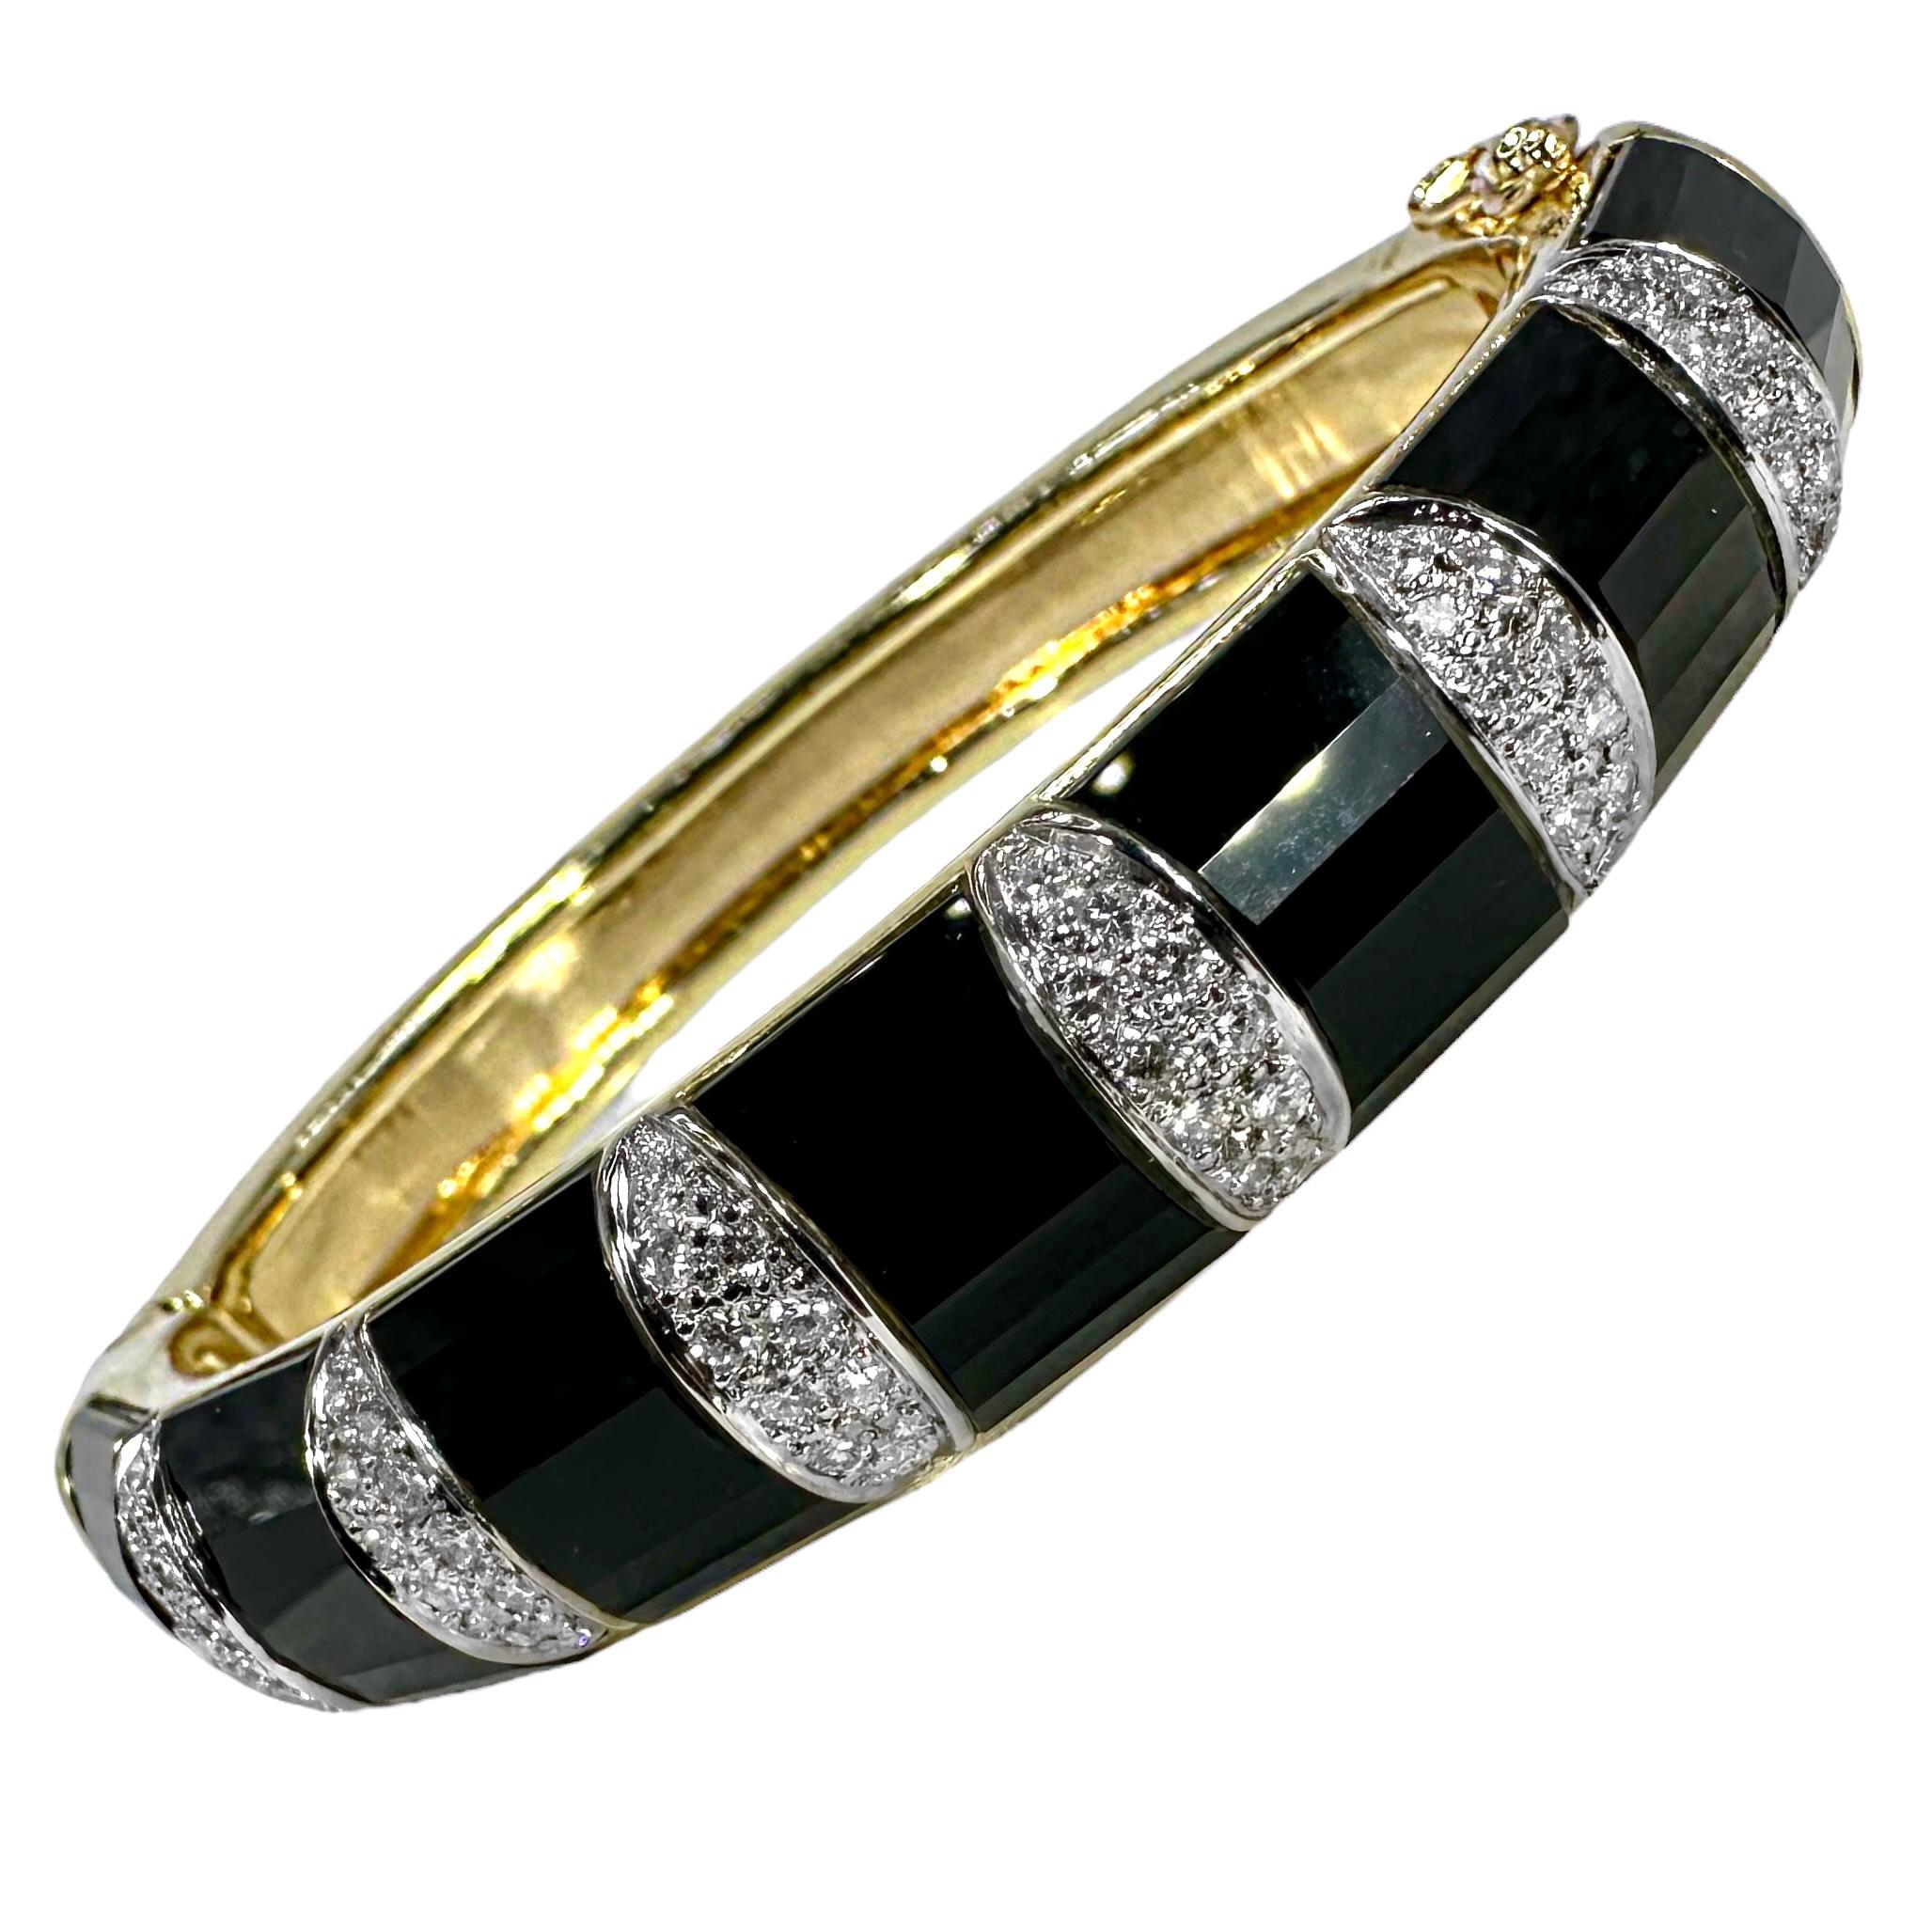 This beautiful and very well crafted 18k yellow gold bangle bracelet by well respected maker, La Triomphe is pure 1970's high style. Characteristic of their offerings, every element of this hinged bracelet is artfully done. Every diamond is set into